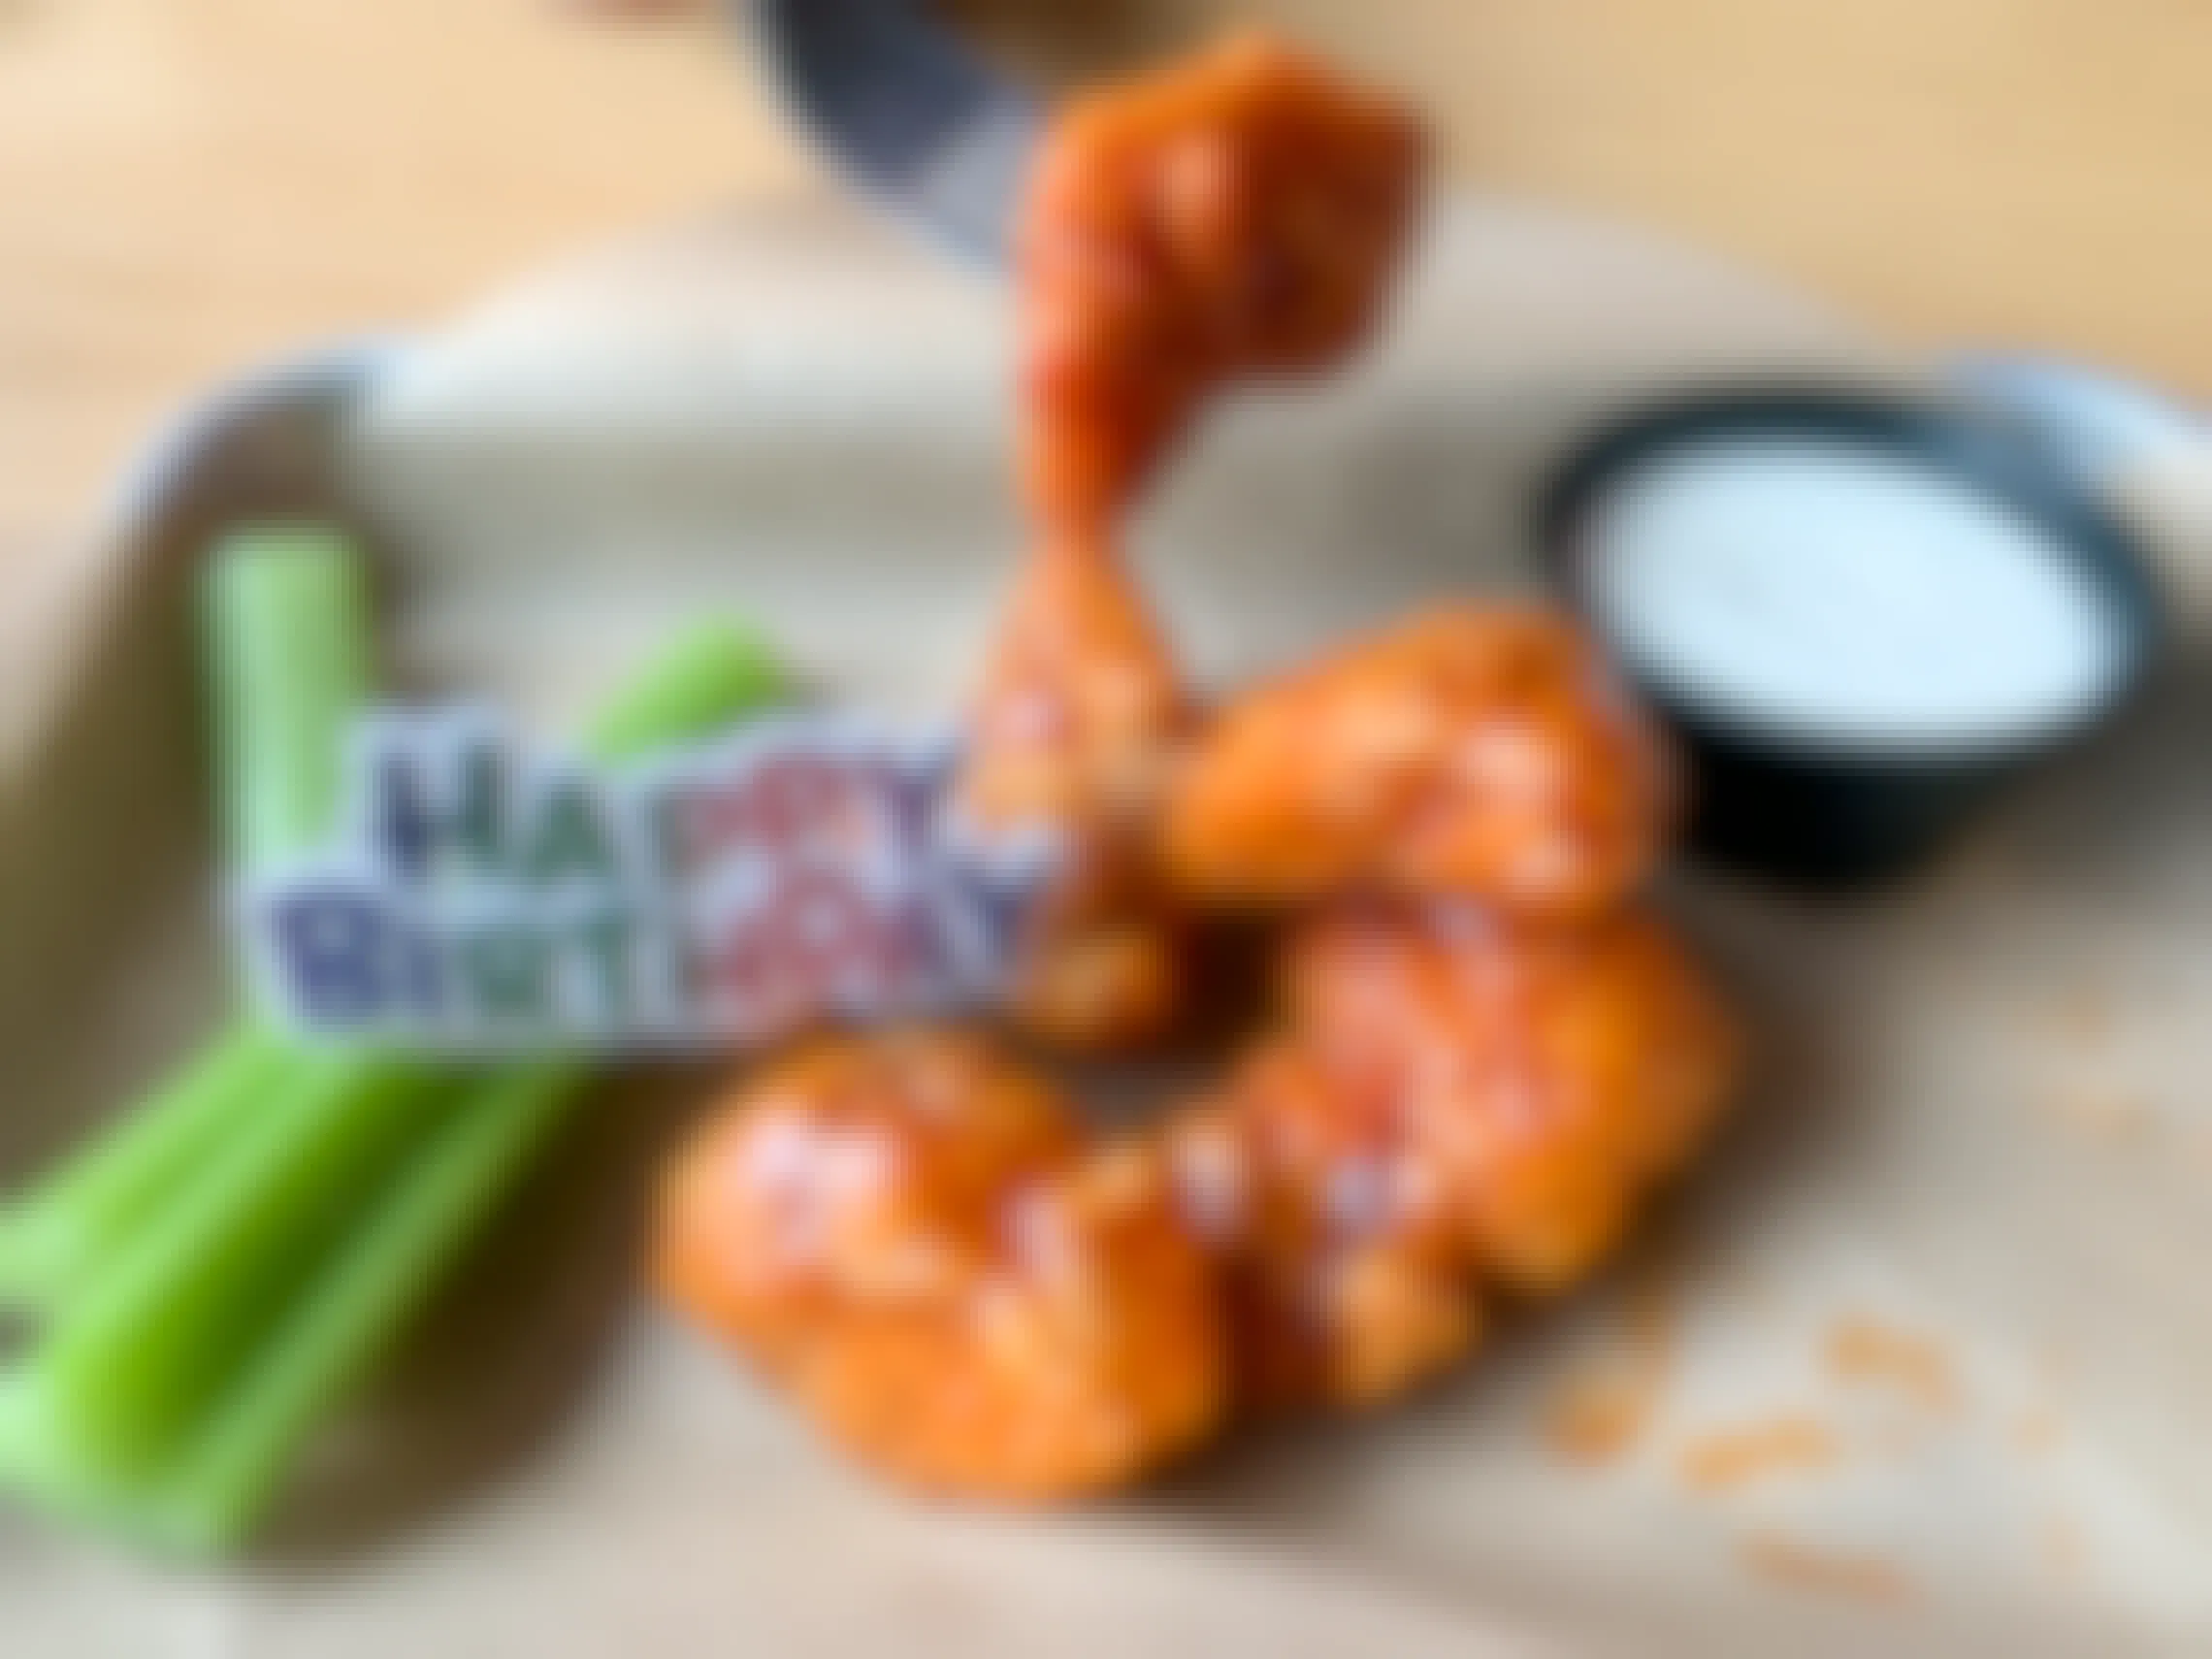 A free fast food Birthday snack size plater of boneless buffalo wings with a plastic Happy Birthday tag on top of it.